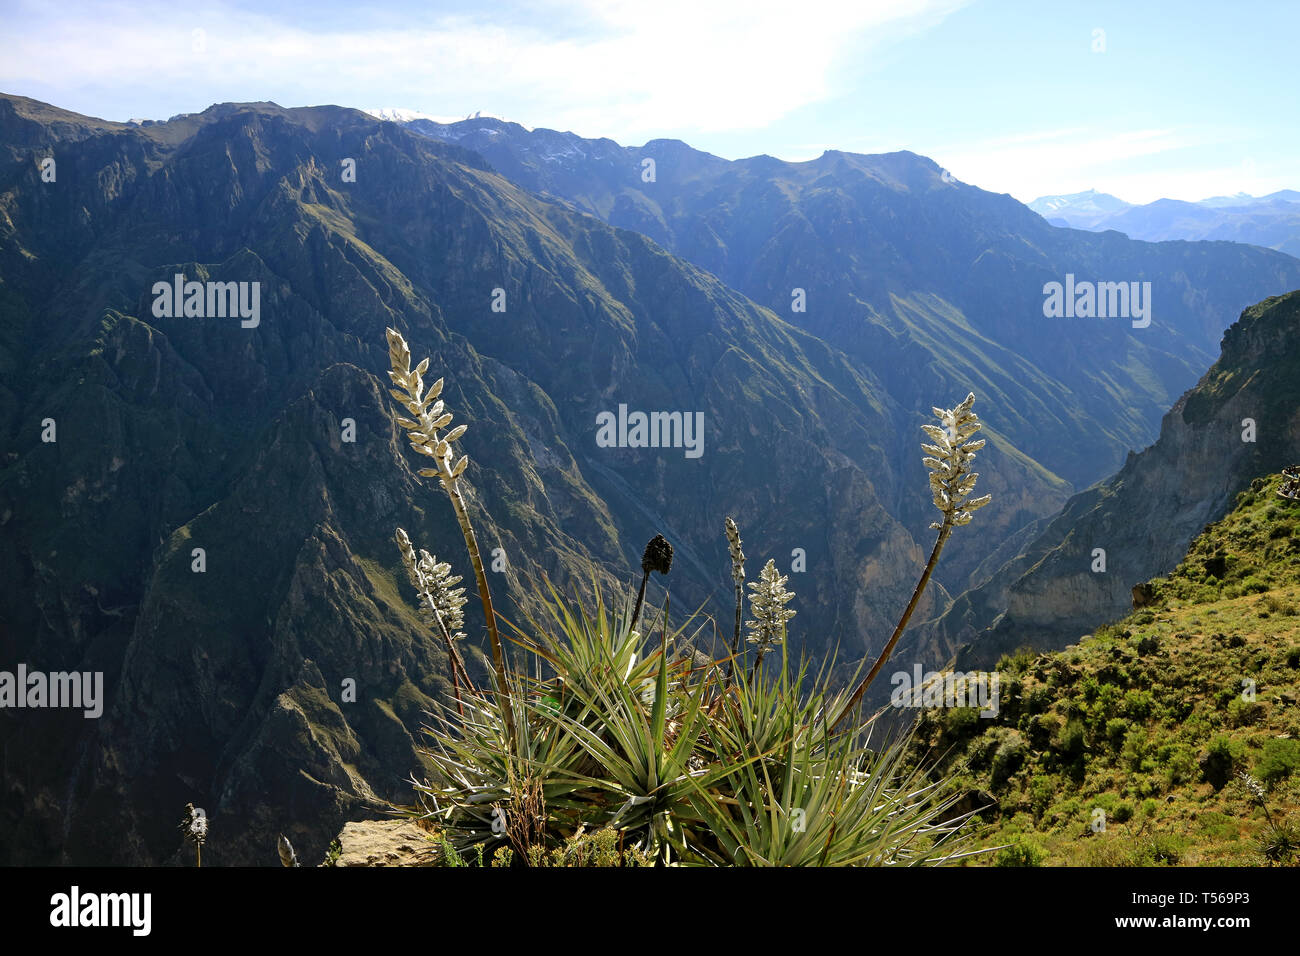 Puya Weberbaueri Flowers at the Colca Canyon, Arequipa Region, Peru, South America Stock Photo